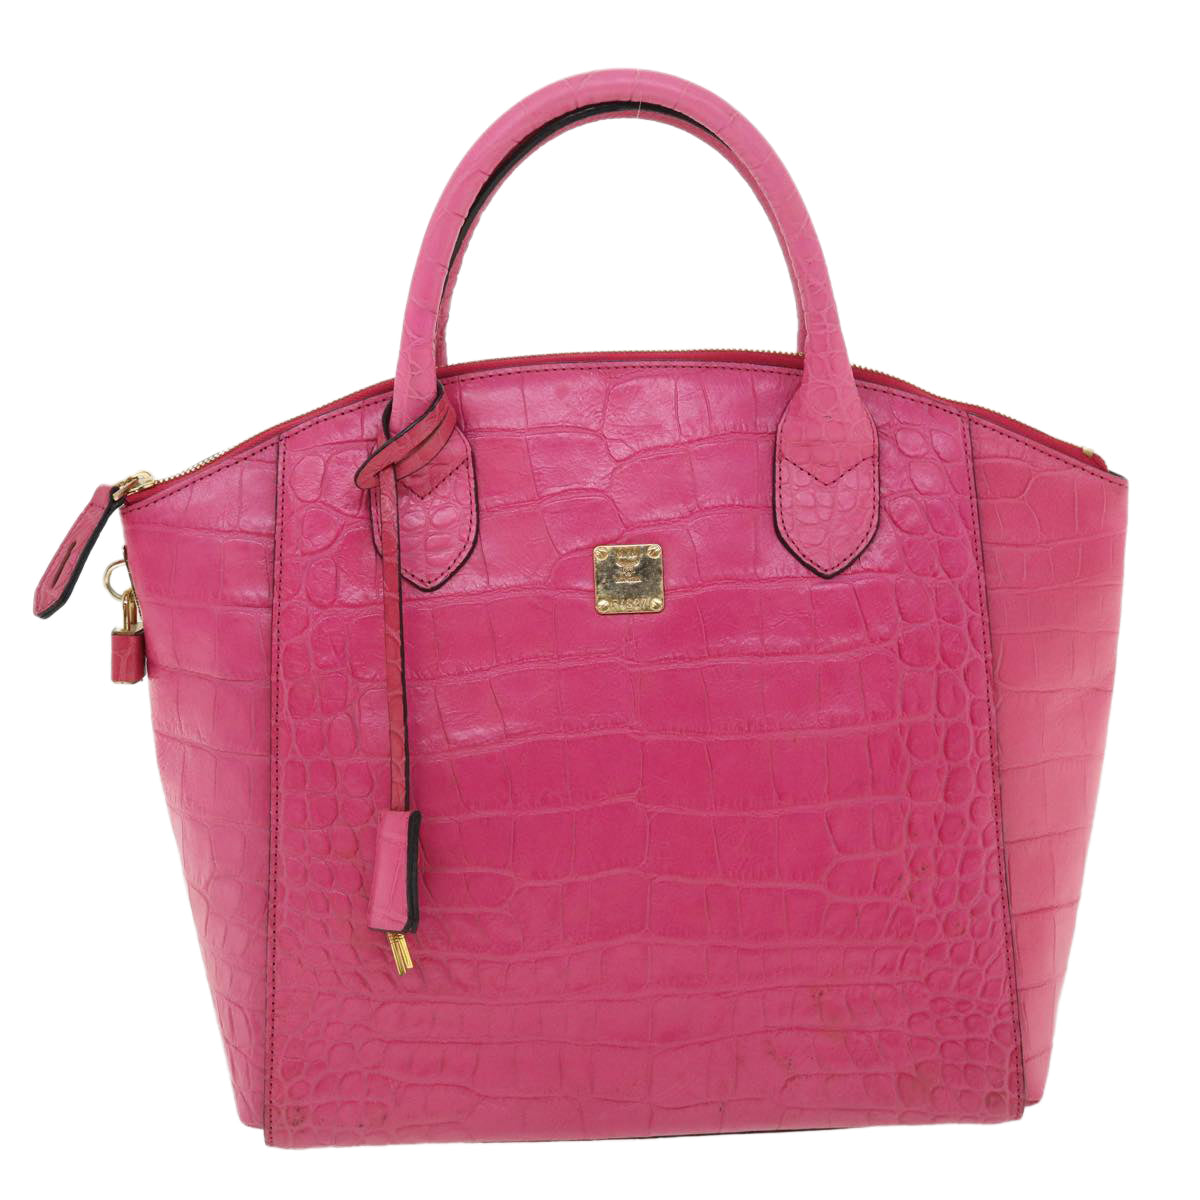 MCM Hand Bag Leather Pink Auth 34038